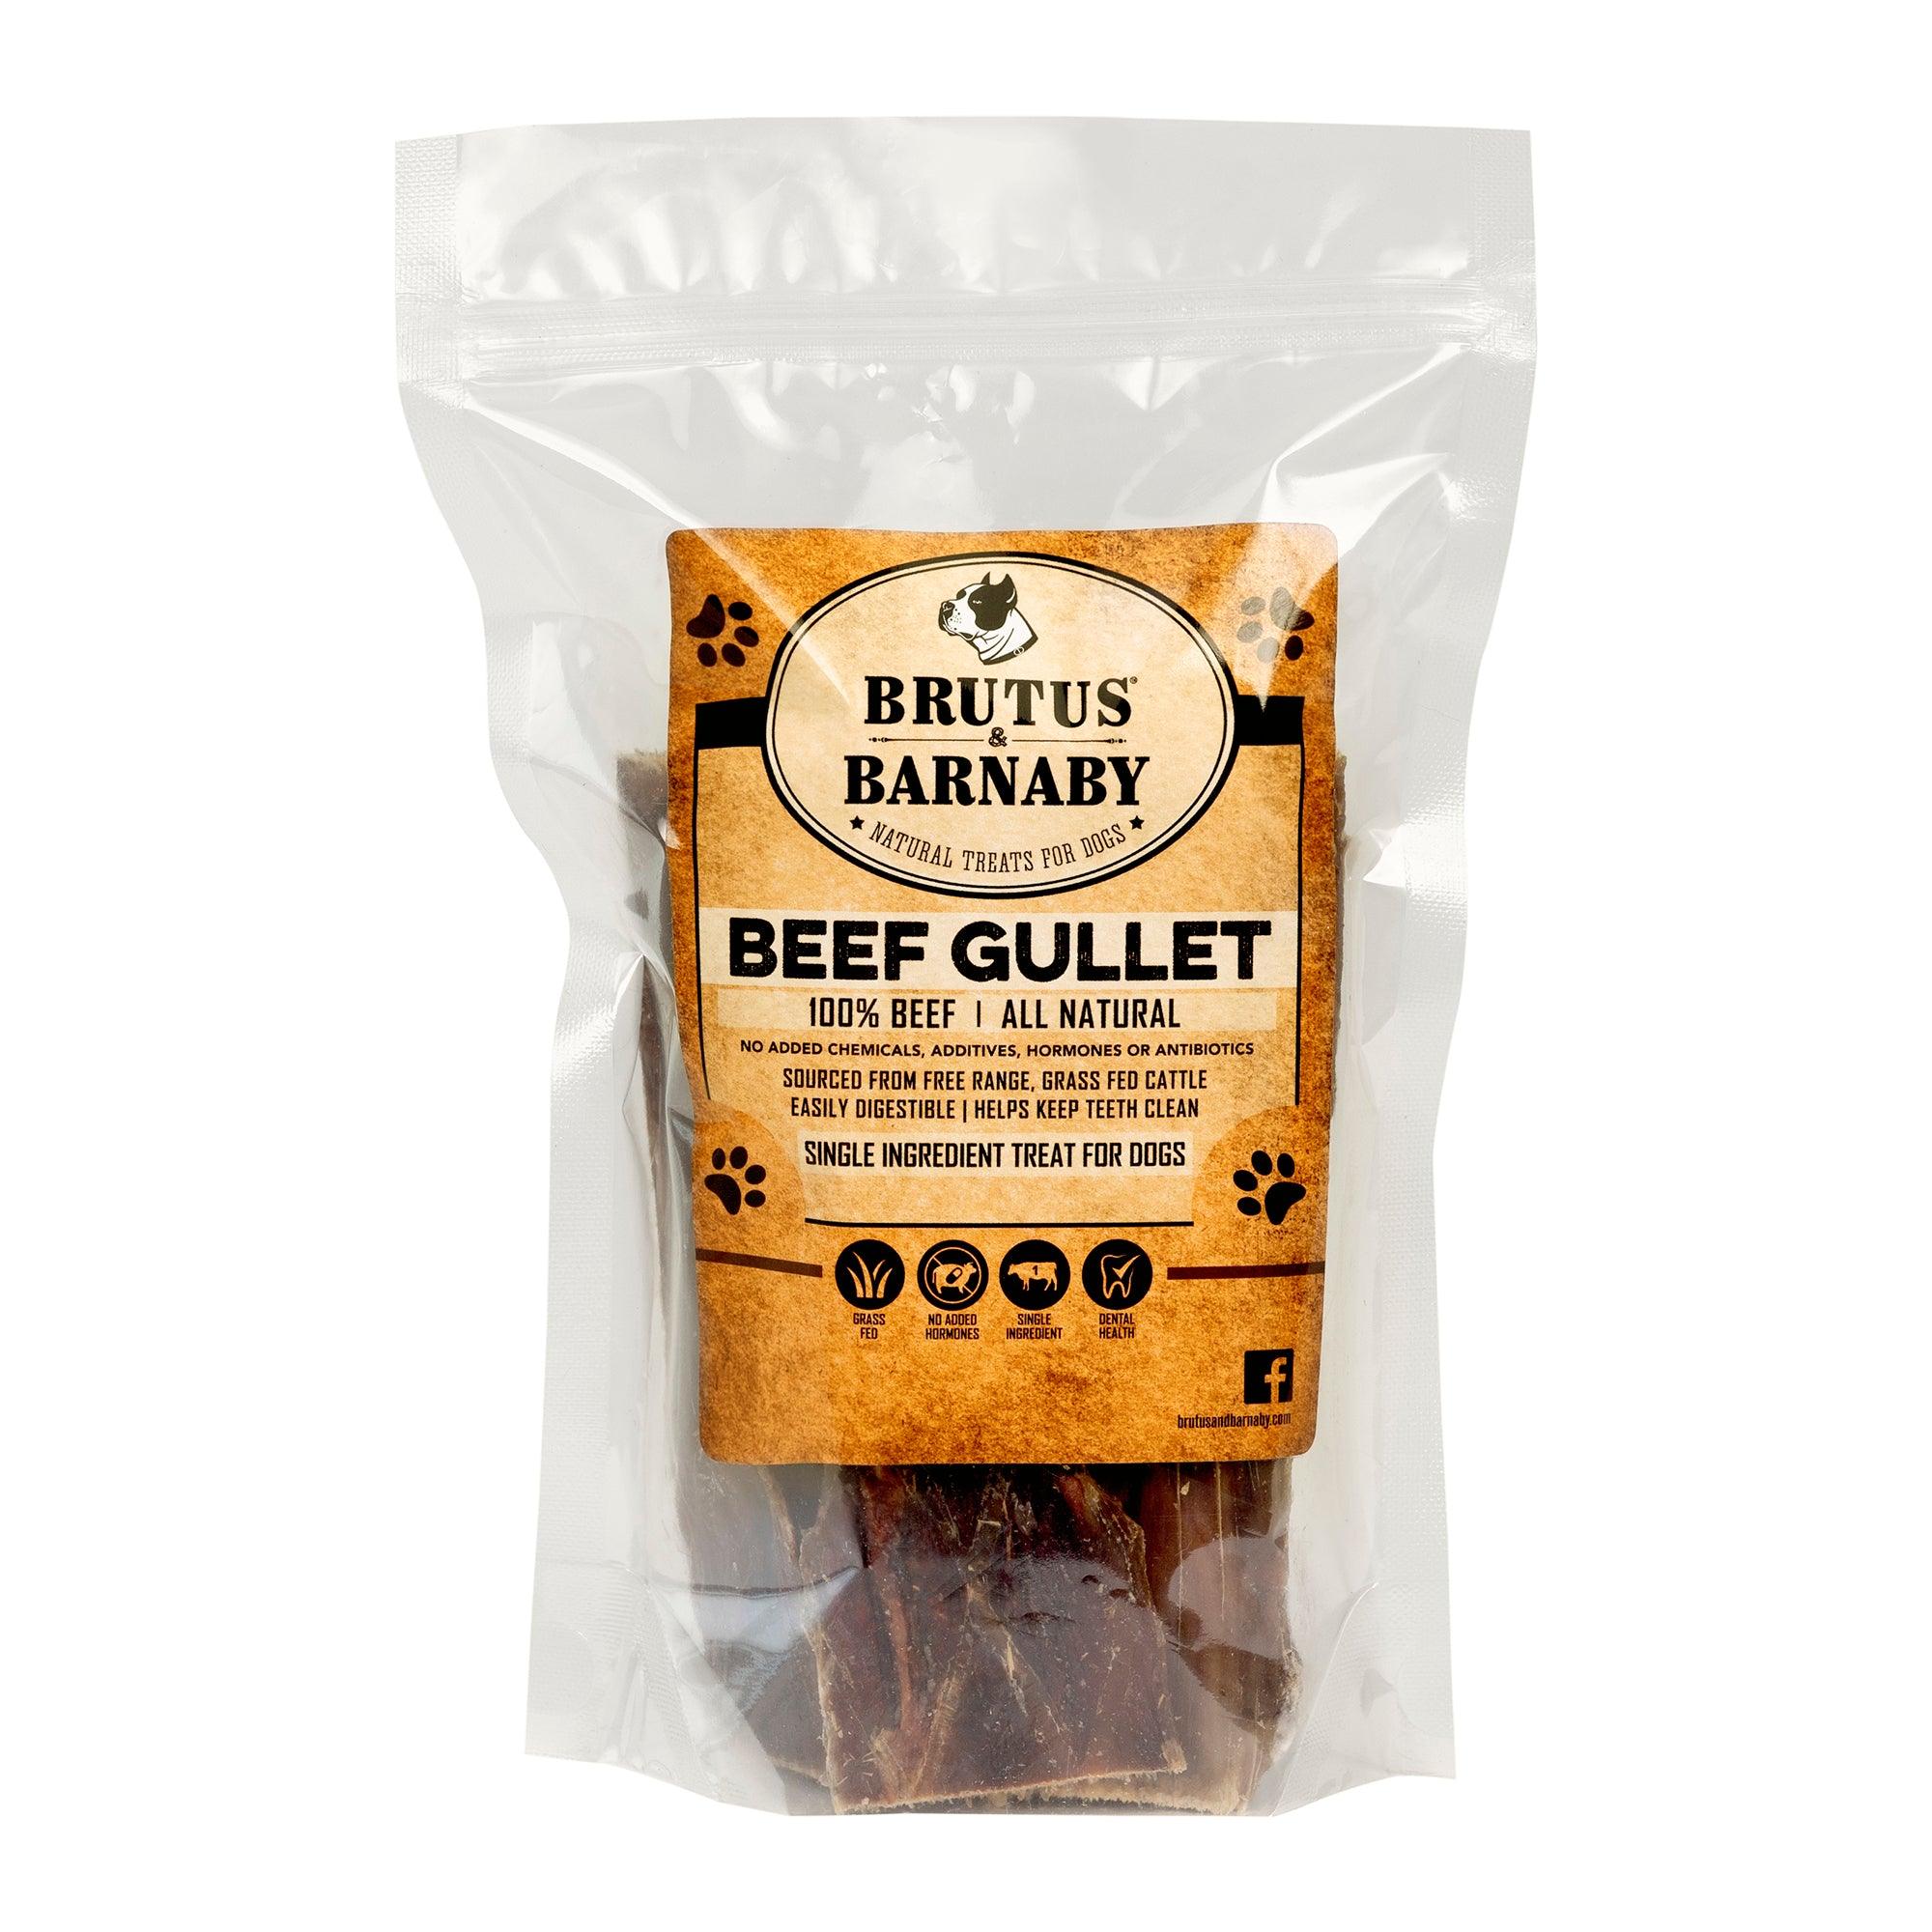 Beef Gullet Dog Treats - Brutus & Barnaby Beef Gullet Flat Strips